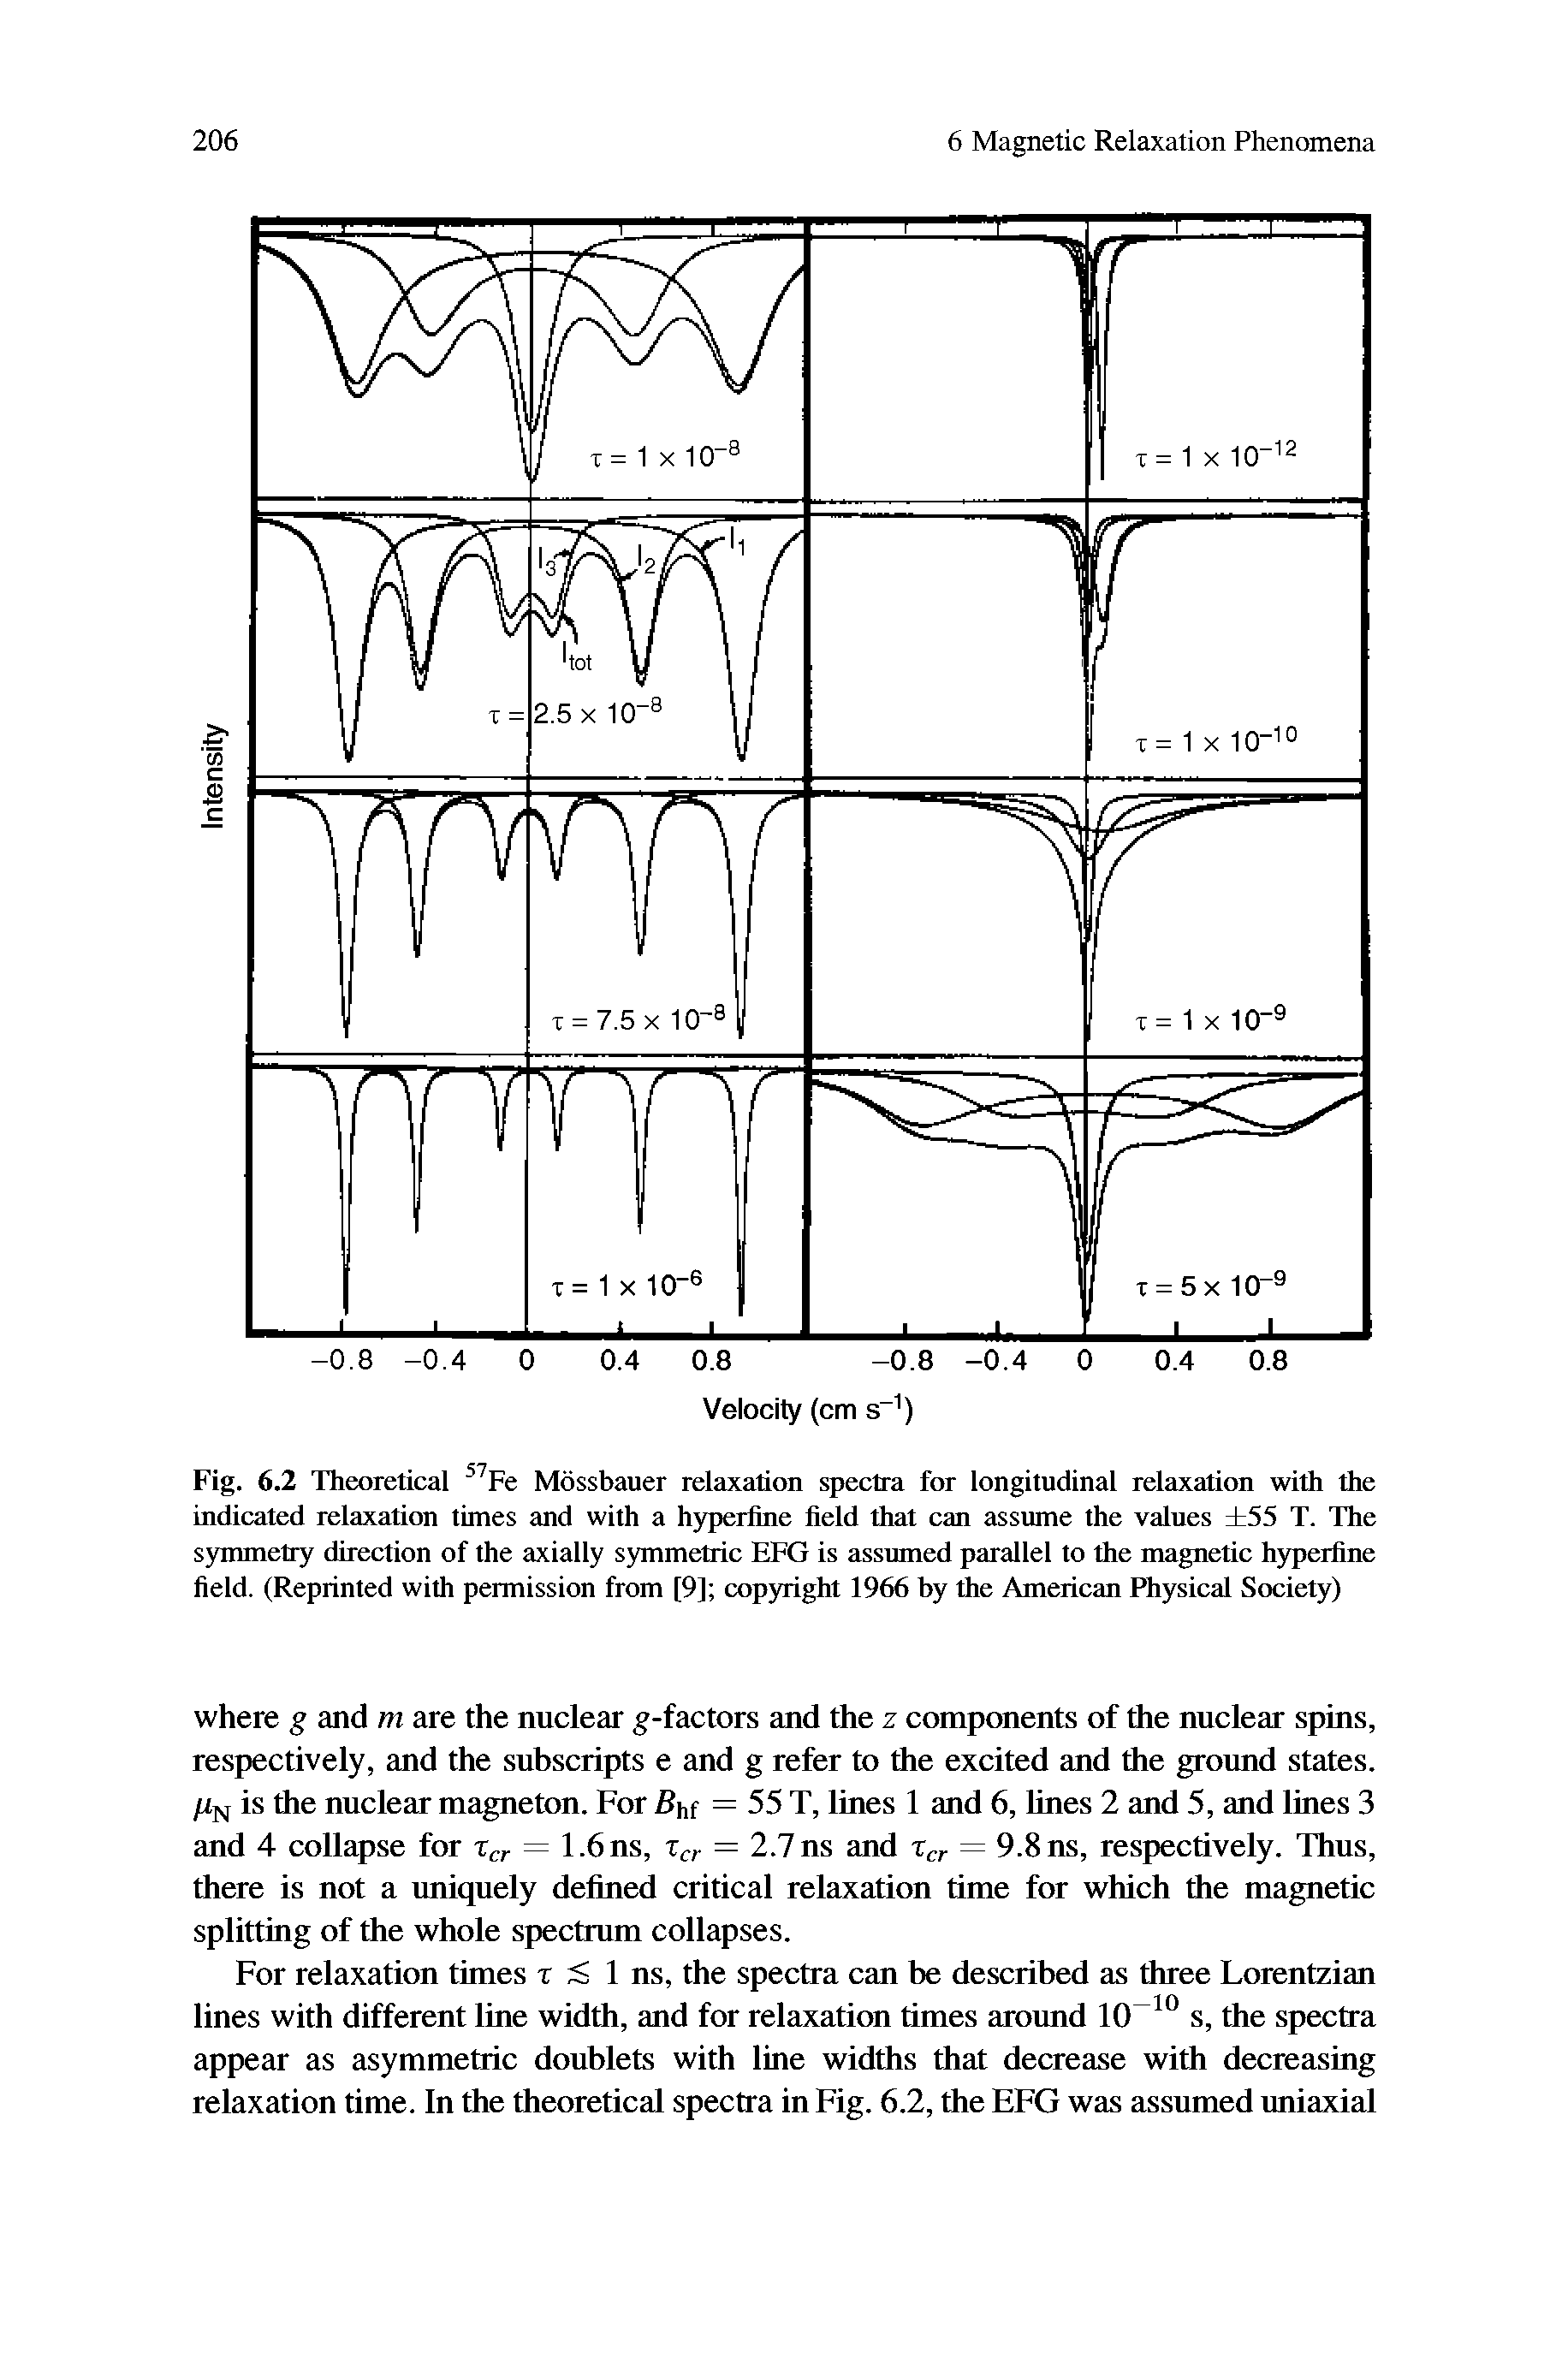 Fig. 6.2 Theoretical Fe Mossbauer relaxation spectra for longitudinal relaxation with the indicated relaxation times and with a hyperline field that can assume the values 55 T. The symmetry direction of the axially symmetric EFG is assumed parallel to the magnetic hyperfine field. (Reprinted with permission from [9] copyright 1966 by the American Physical Society)...